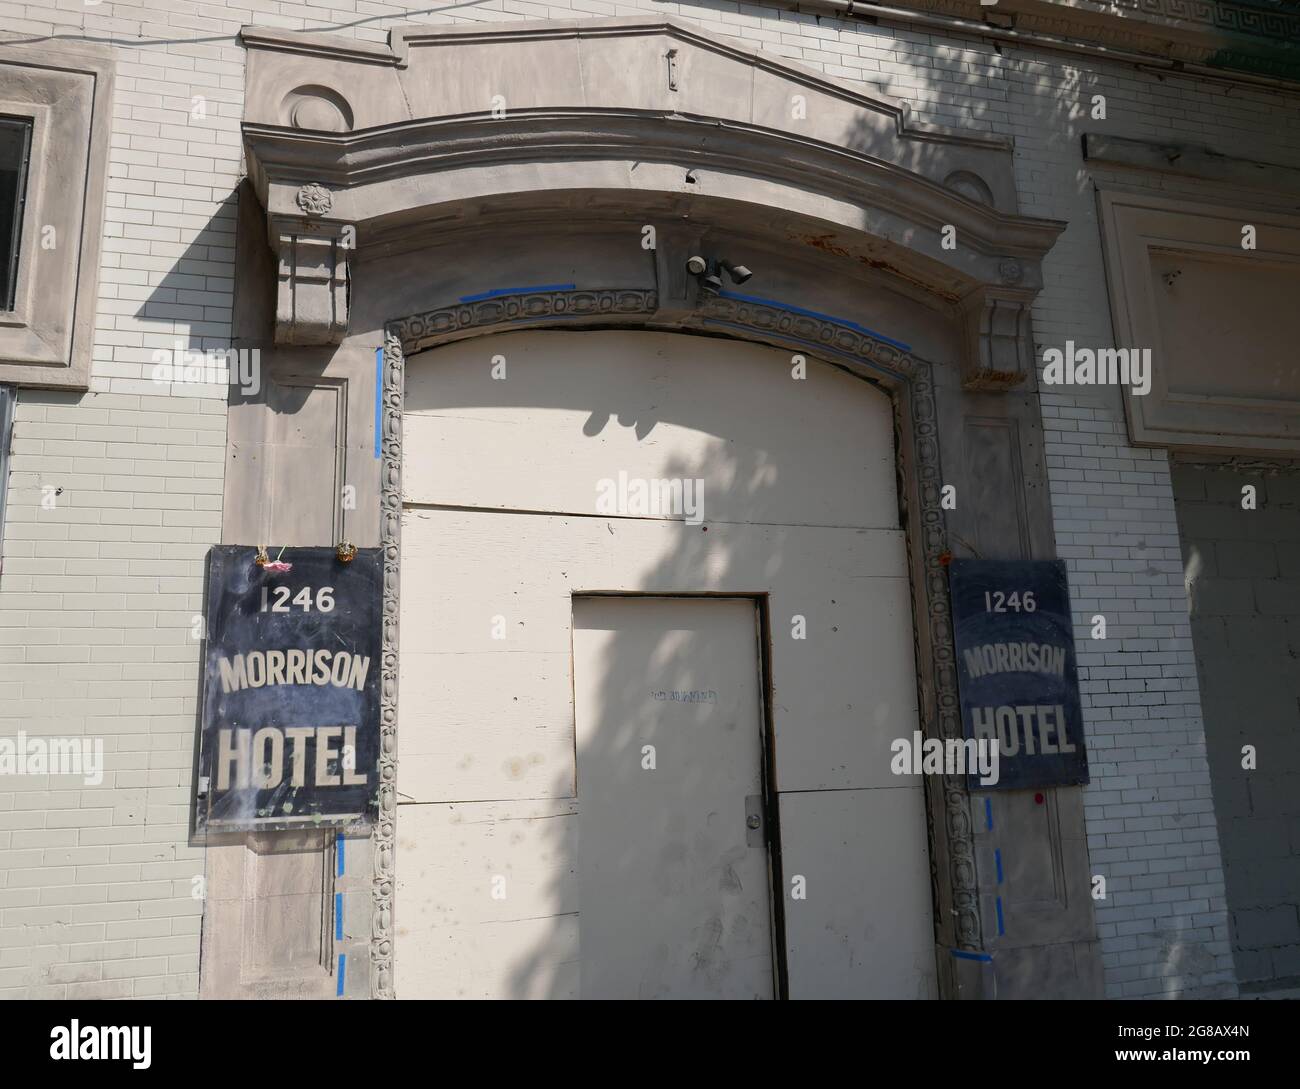 Los Angeles, California, USA 12th July 2021 A general view of The Morrison Hotel where Jim Morrison and the Doors did a photoshoot for their album cover at The Morrison Hotel at 1246 South Hope Street on July 12, 2021 in Hollywood, California, USA. Photo by Barry King/Alamy Stock Photo Stock Photo